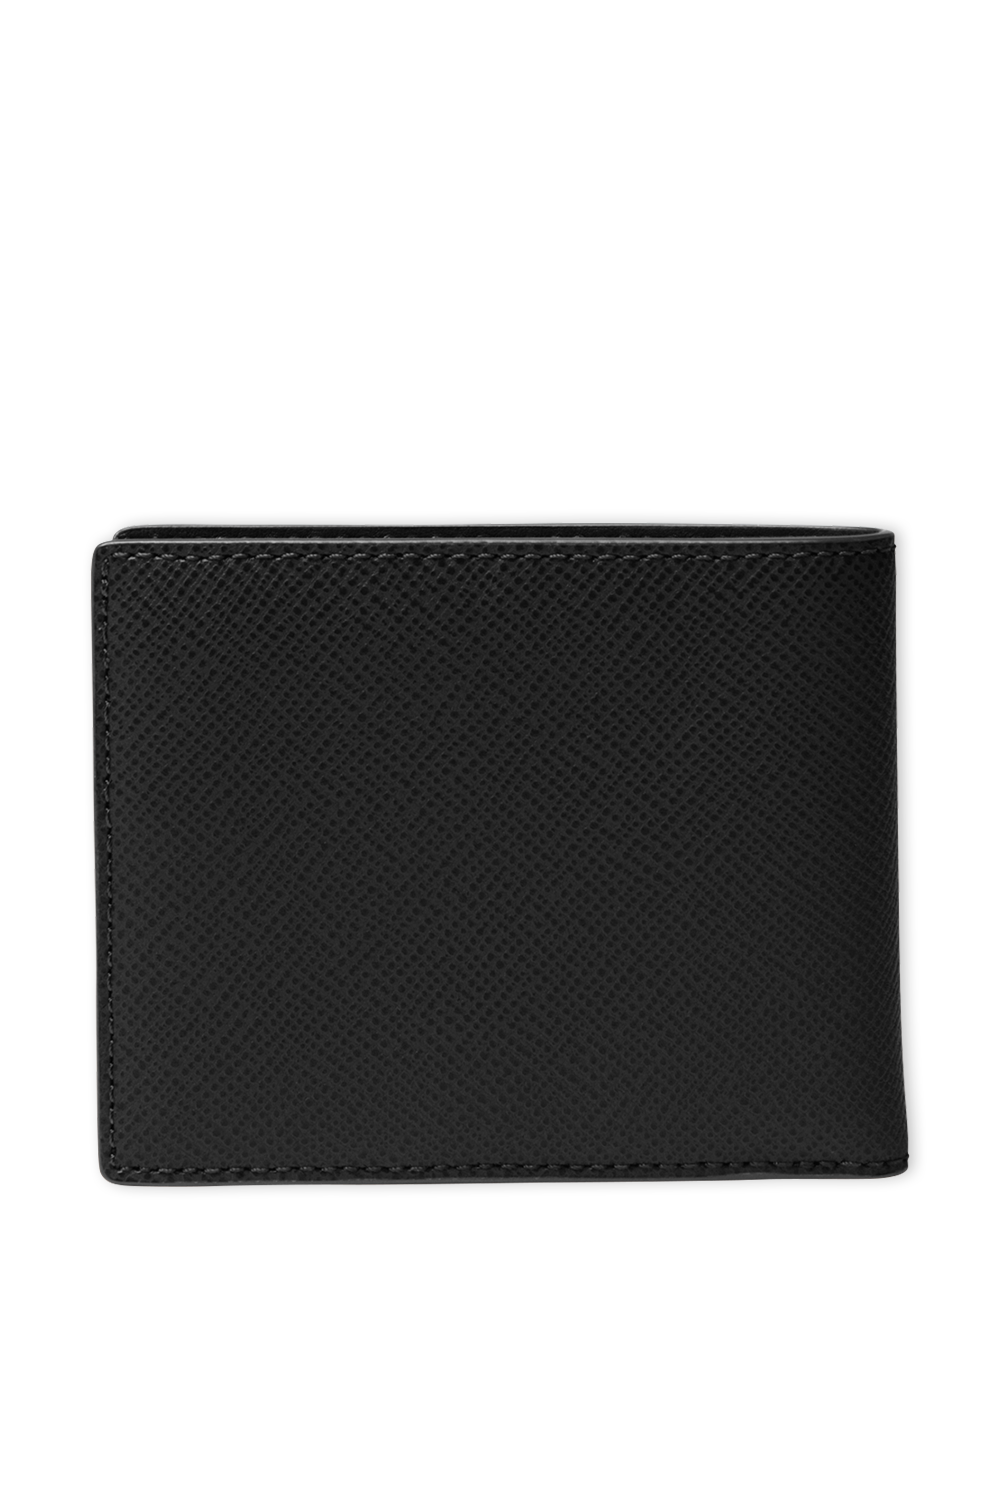 Billfold with Coin Pocket in Black MICHAEL KORS